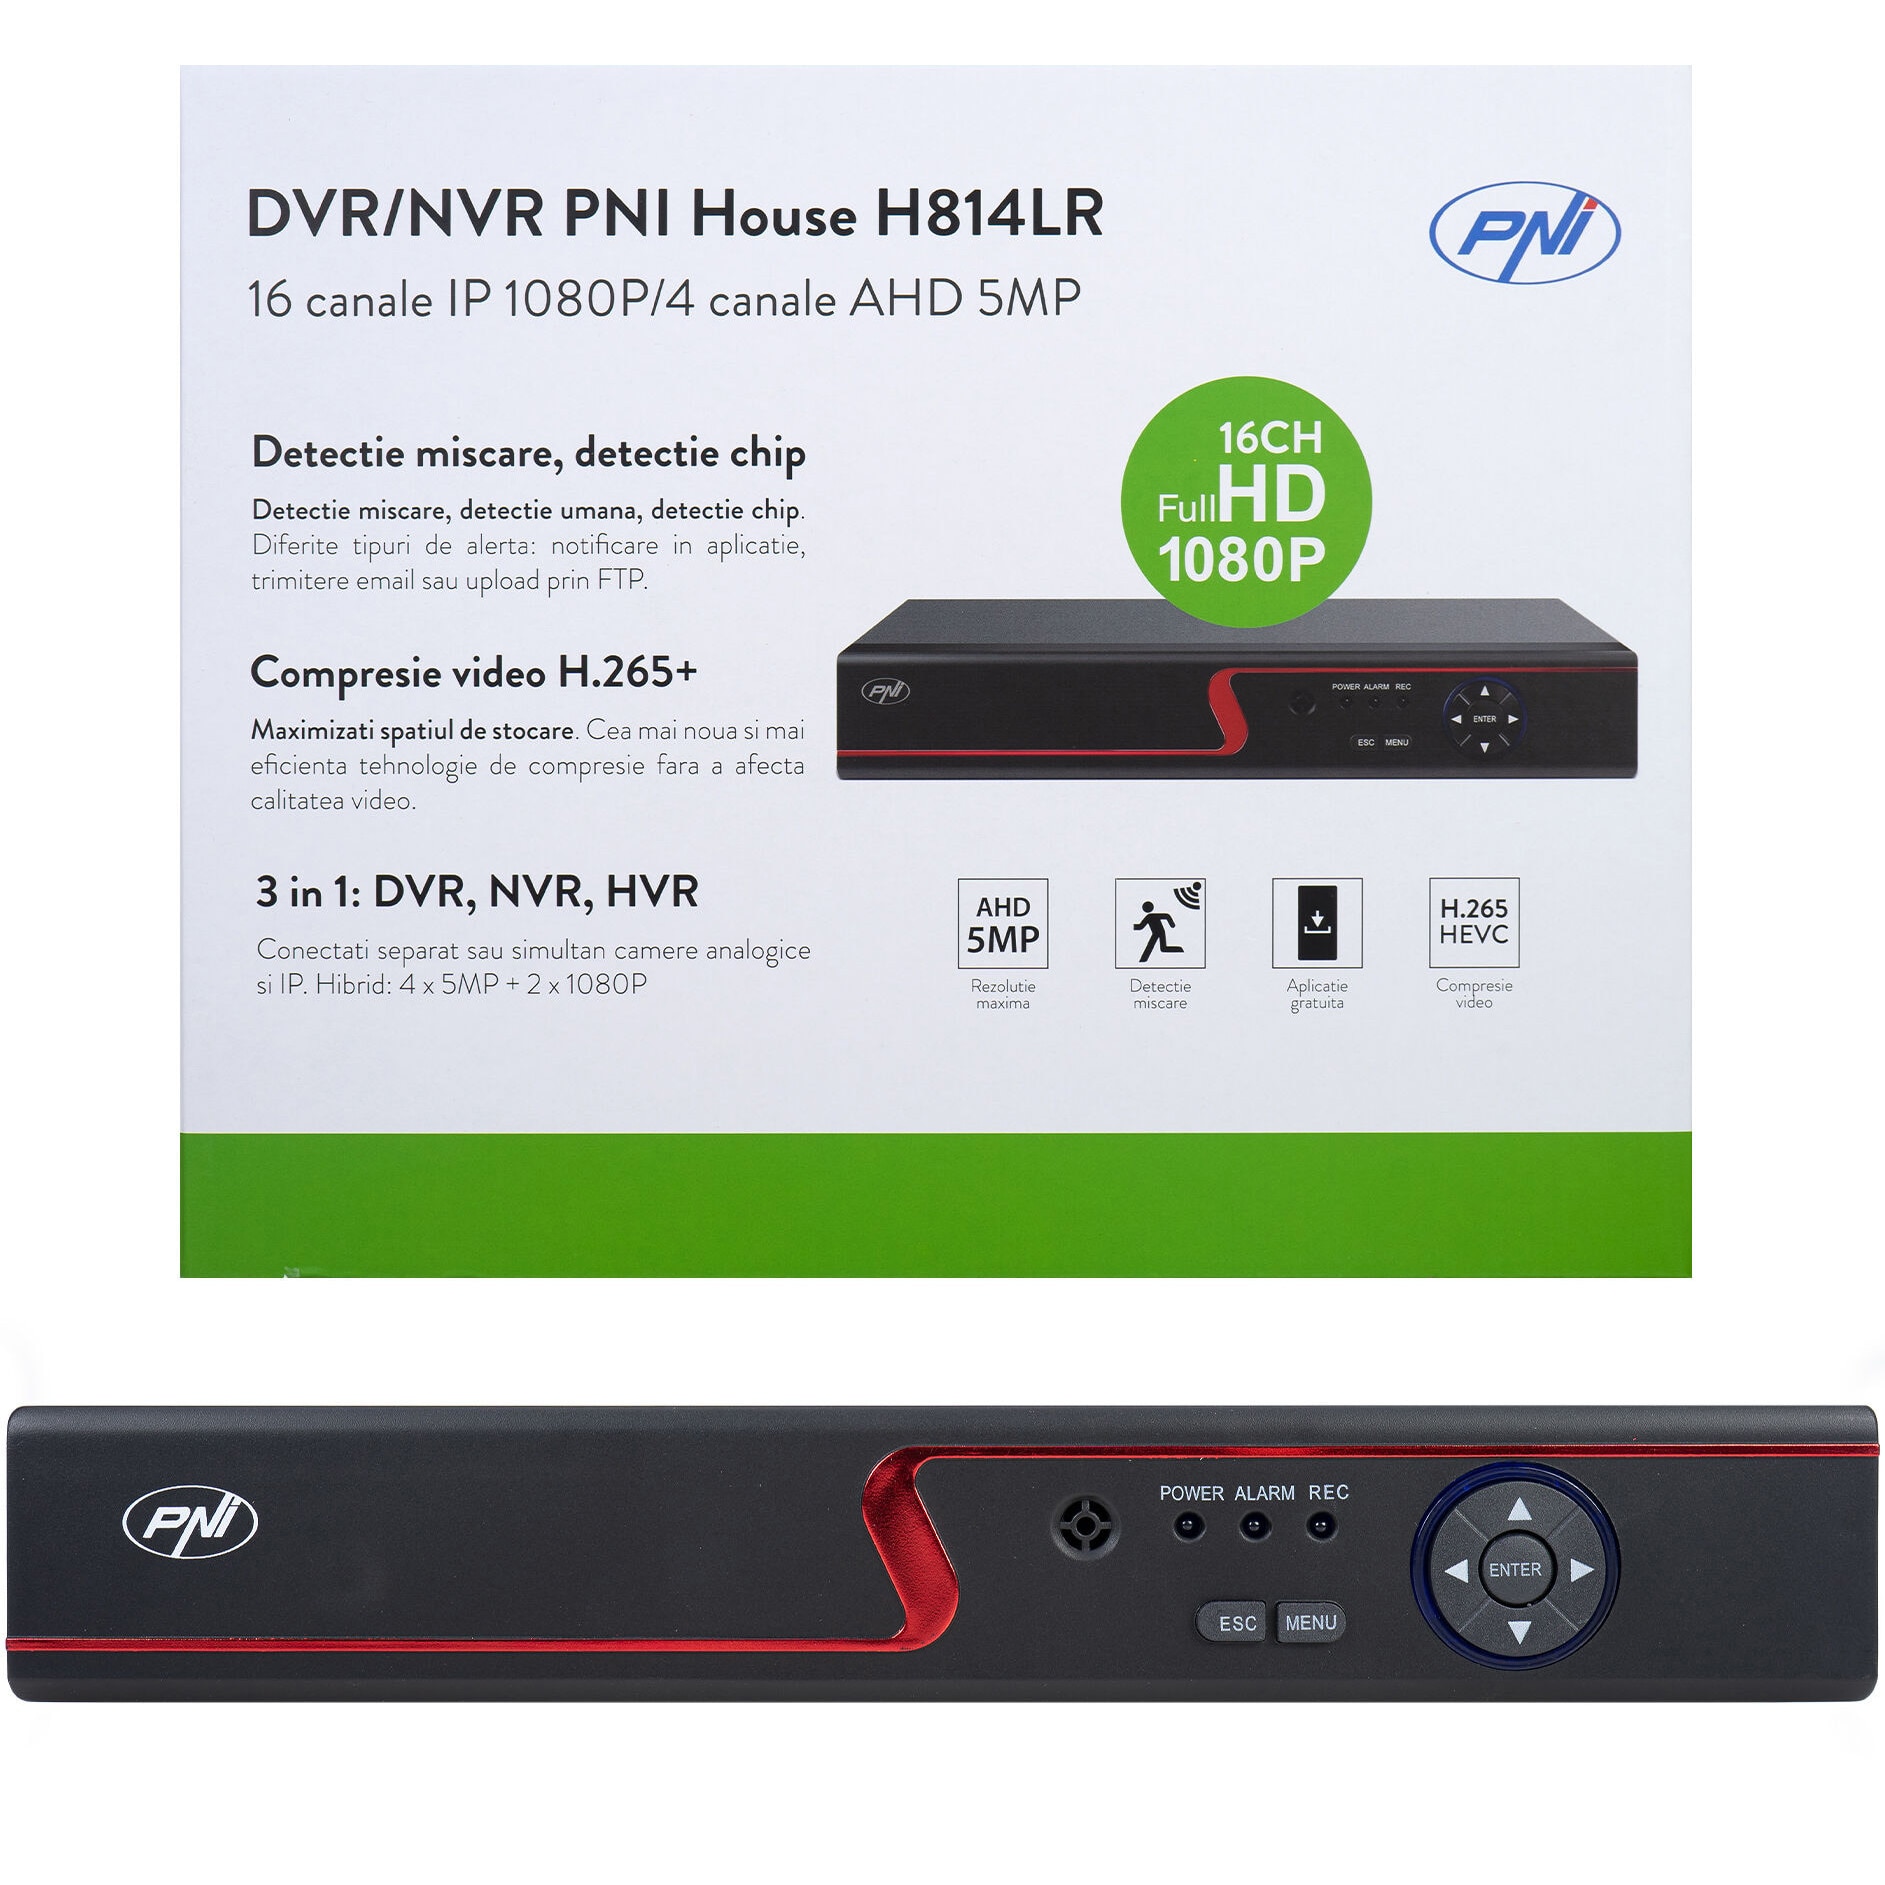 Careful reading promise Suffix Kit supraveghere video AHD PNI House PTZ1300 Full HD - NVR si 4 camere  exterior 2MP full HD 1080P - eMAG.ro